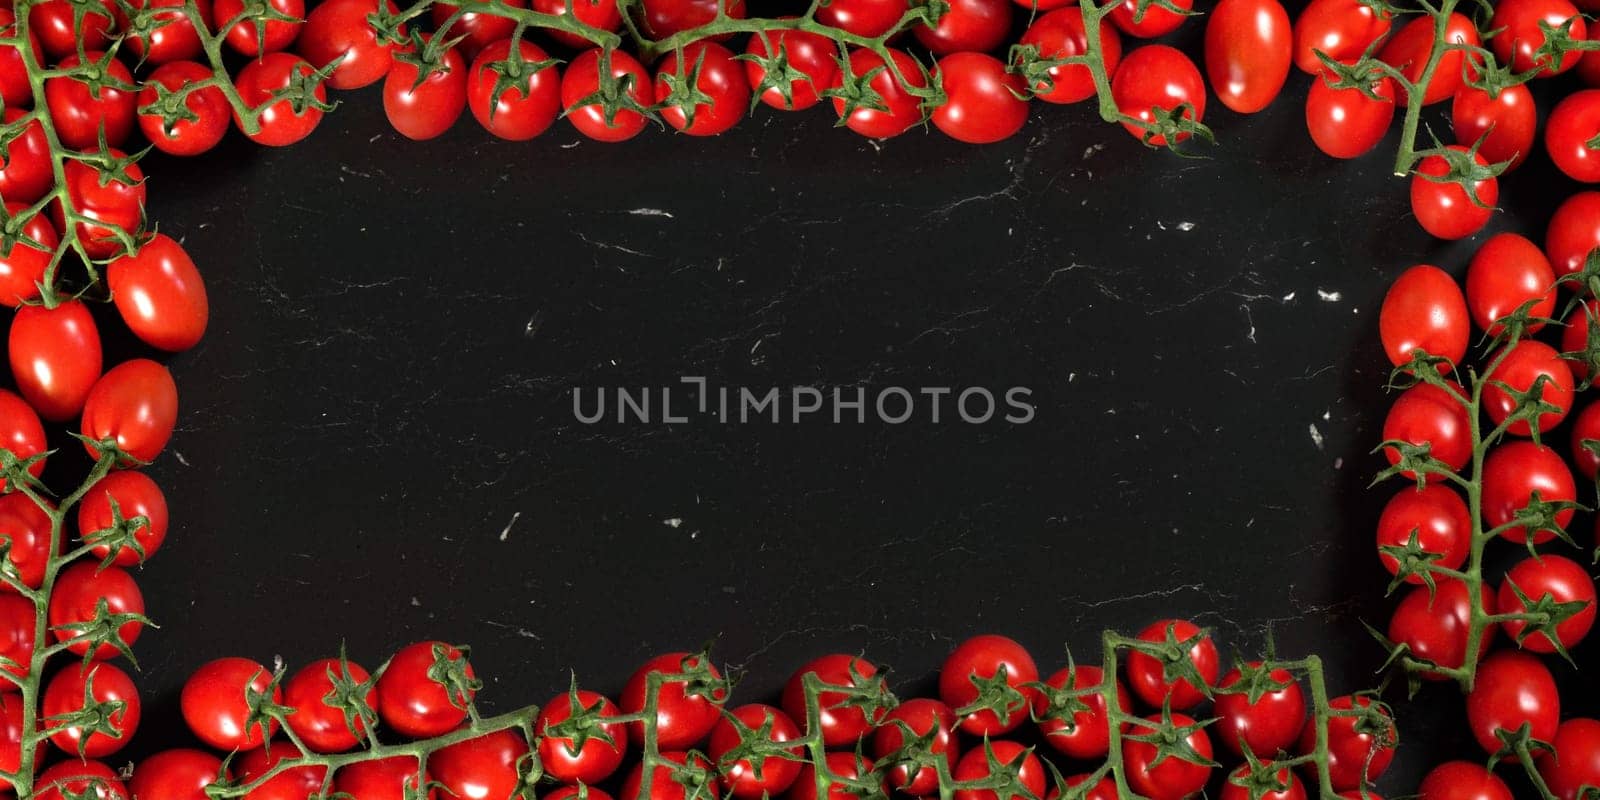 Border frame made out of tomatoes with green vine leaves, empty space left for text on black marble like board. by Ivanko